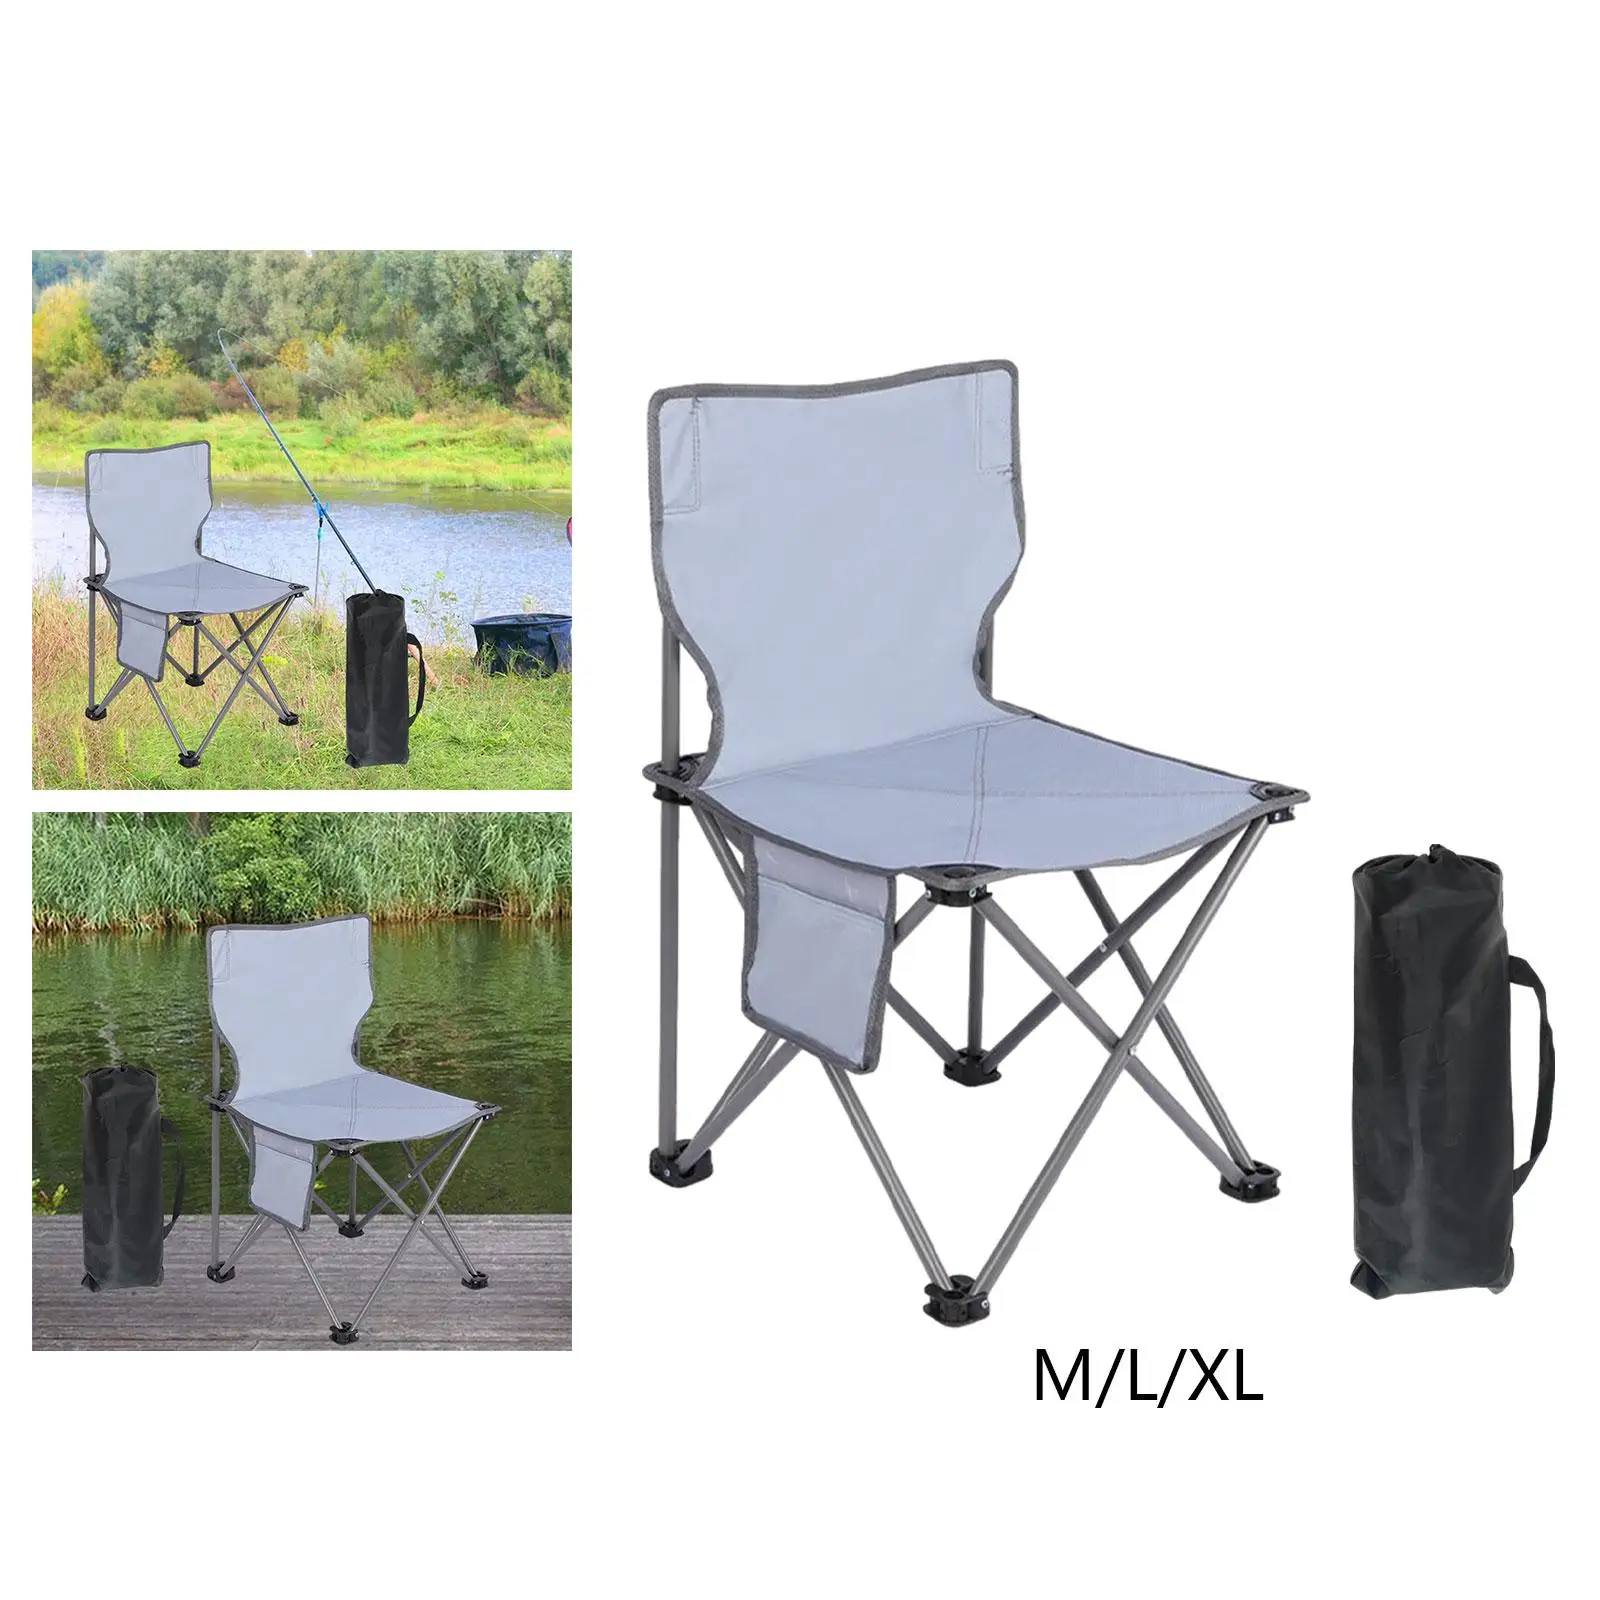 Portable Camping Chair with Storage Bag Outdoor Furniture Folding Chair for Outside for Park Lawn Beach Hiking Backpacking